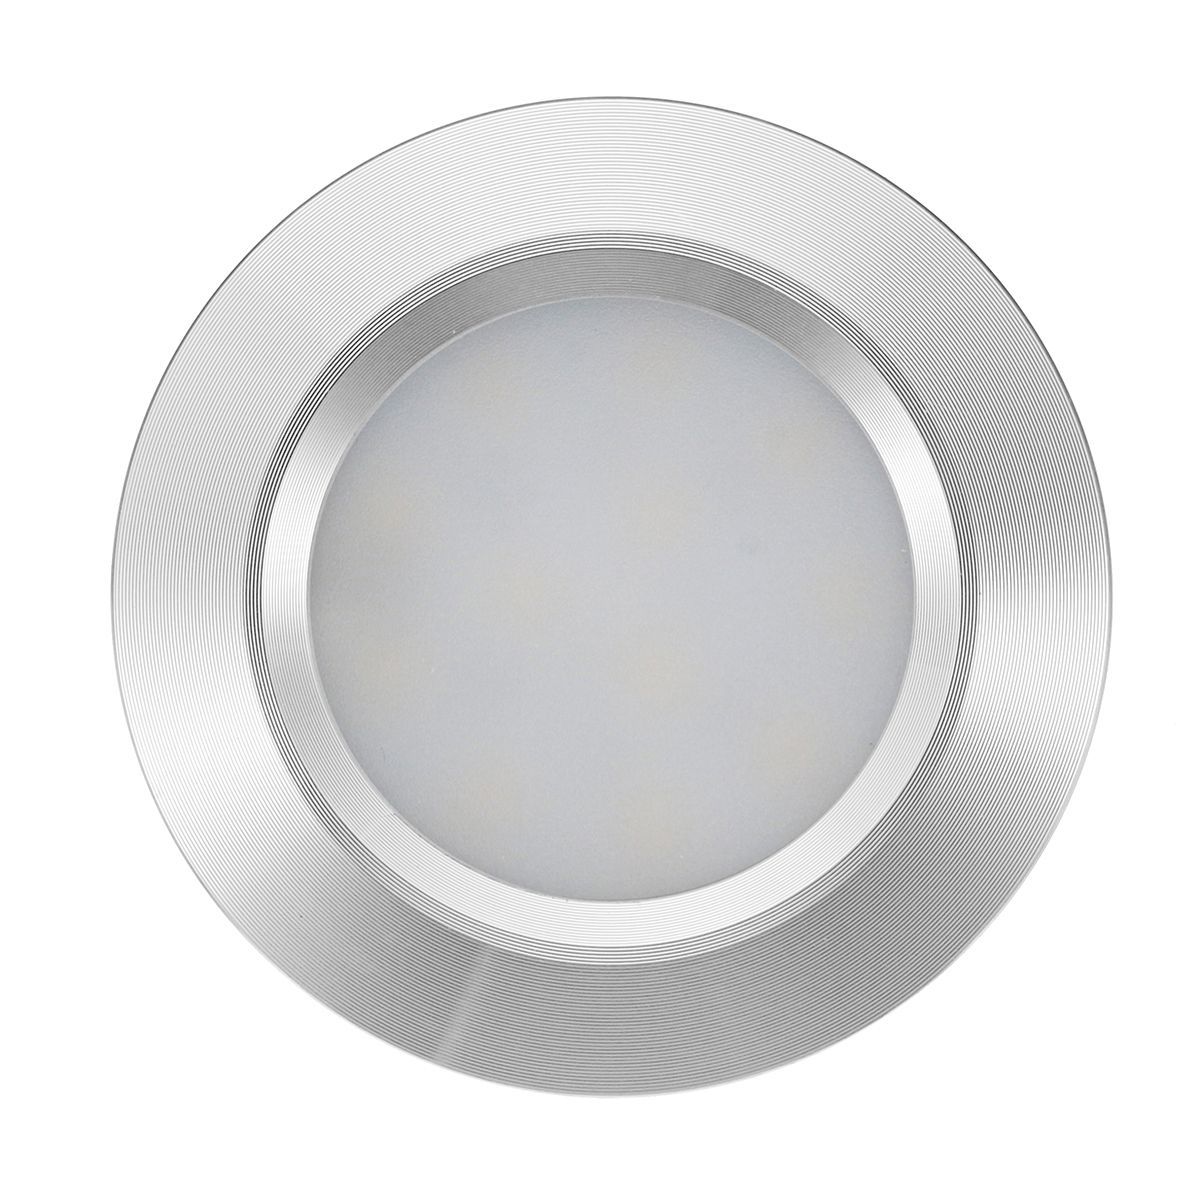 RV-LED-Round-Recessed-Ceiling-Light-Flat-Panel-Down-Cabinet-Lamp-Warm-WhiteWhite-1370205